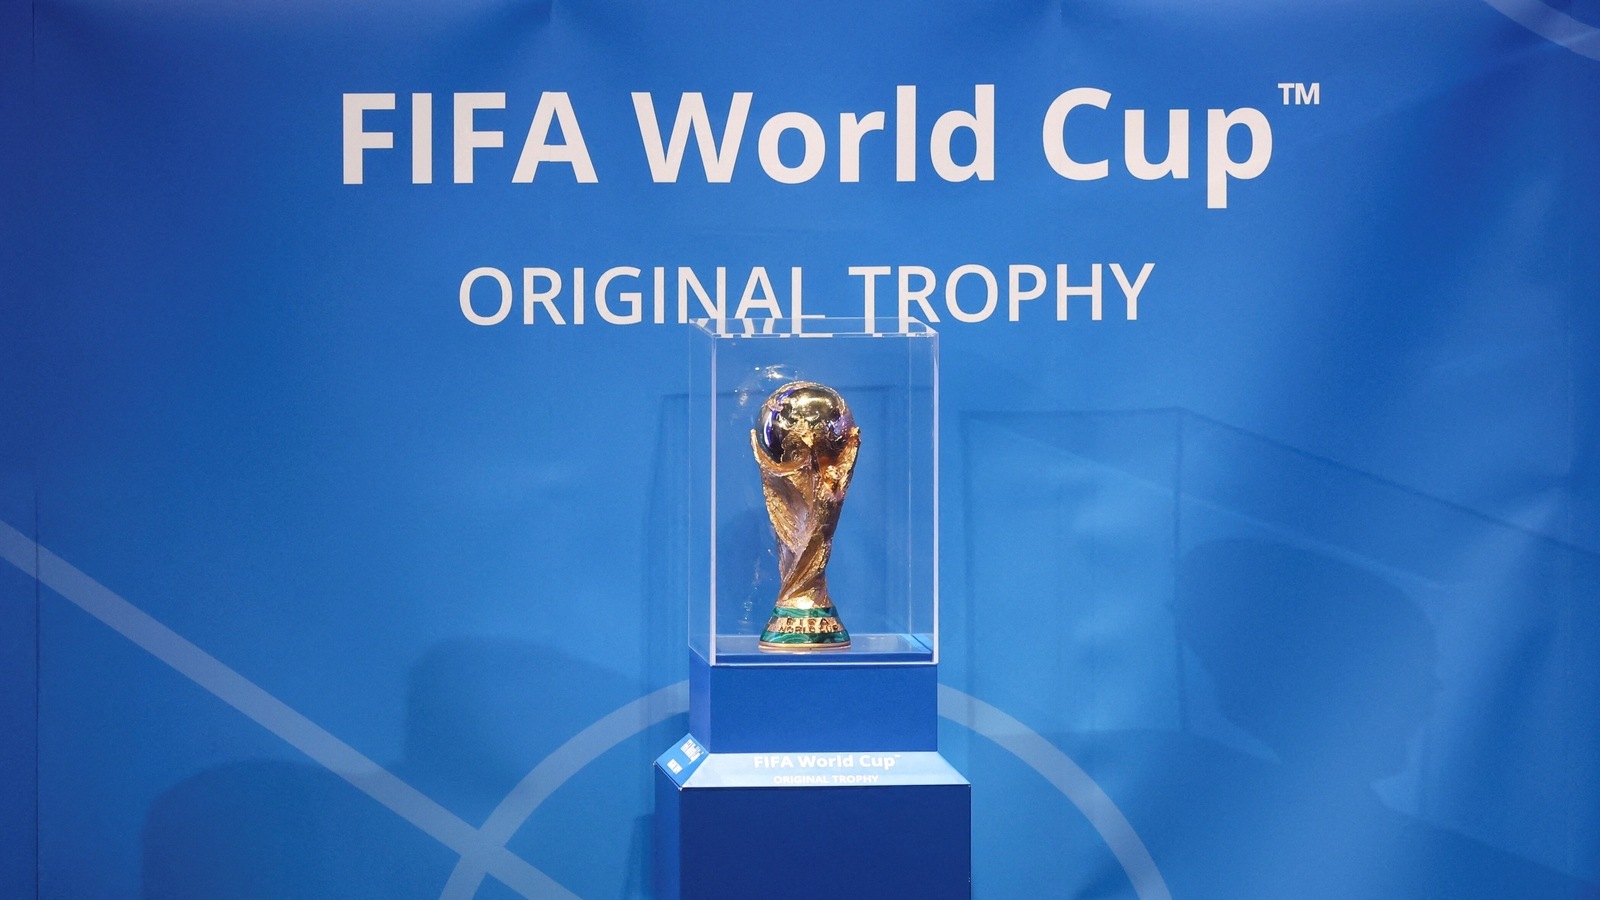 FIFA WORLD CUP 2022: Alcohol to be served selectively in Muslim nation Qatar